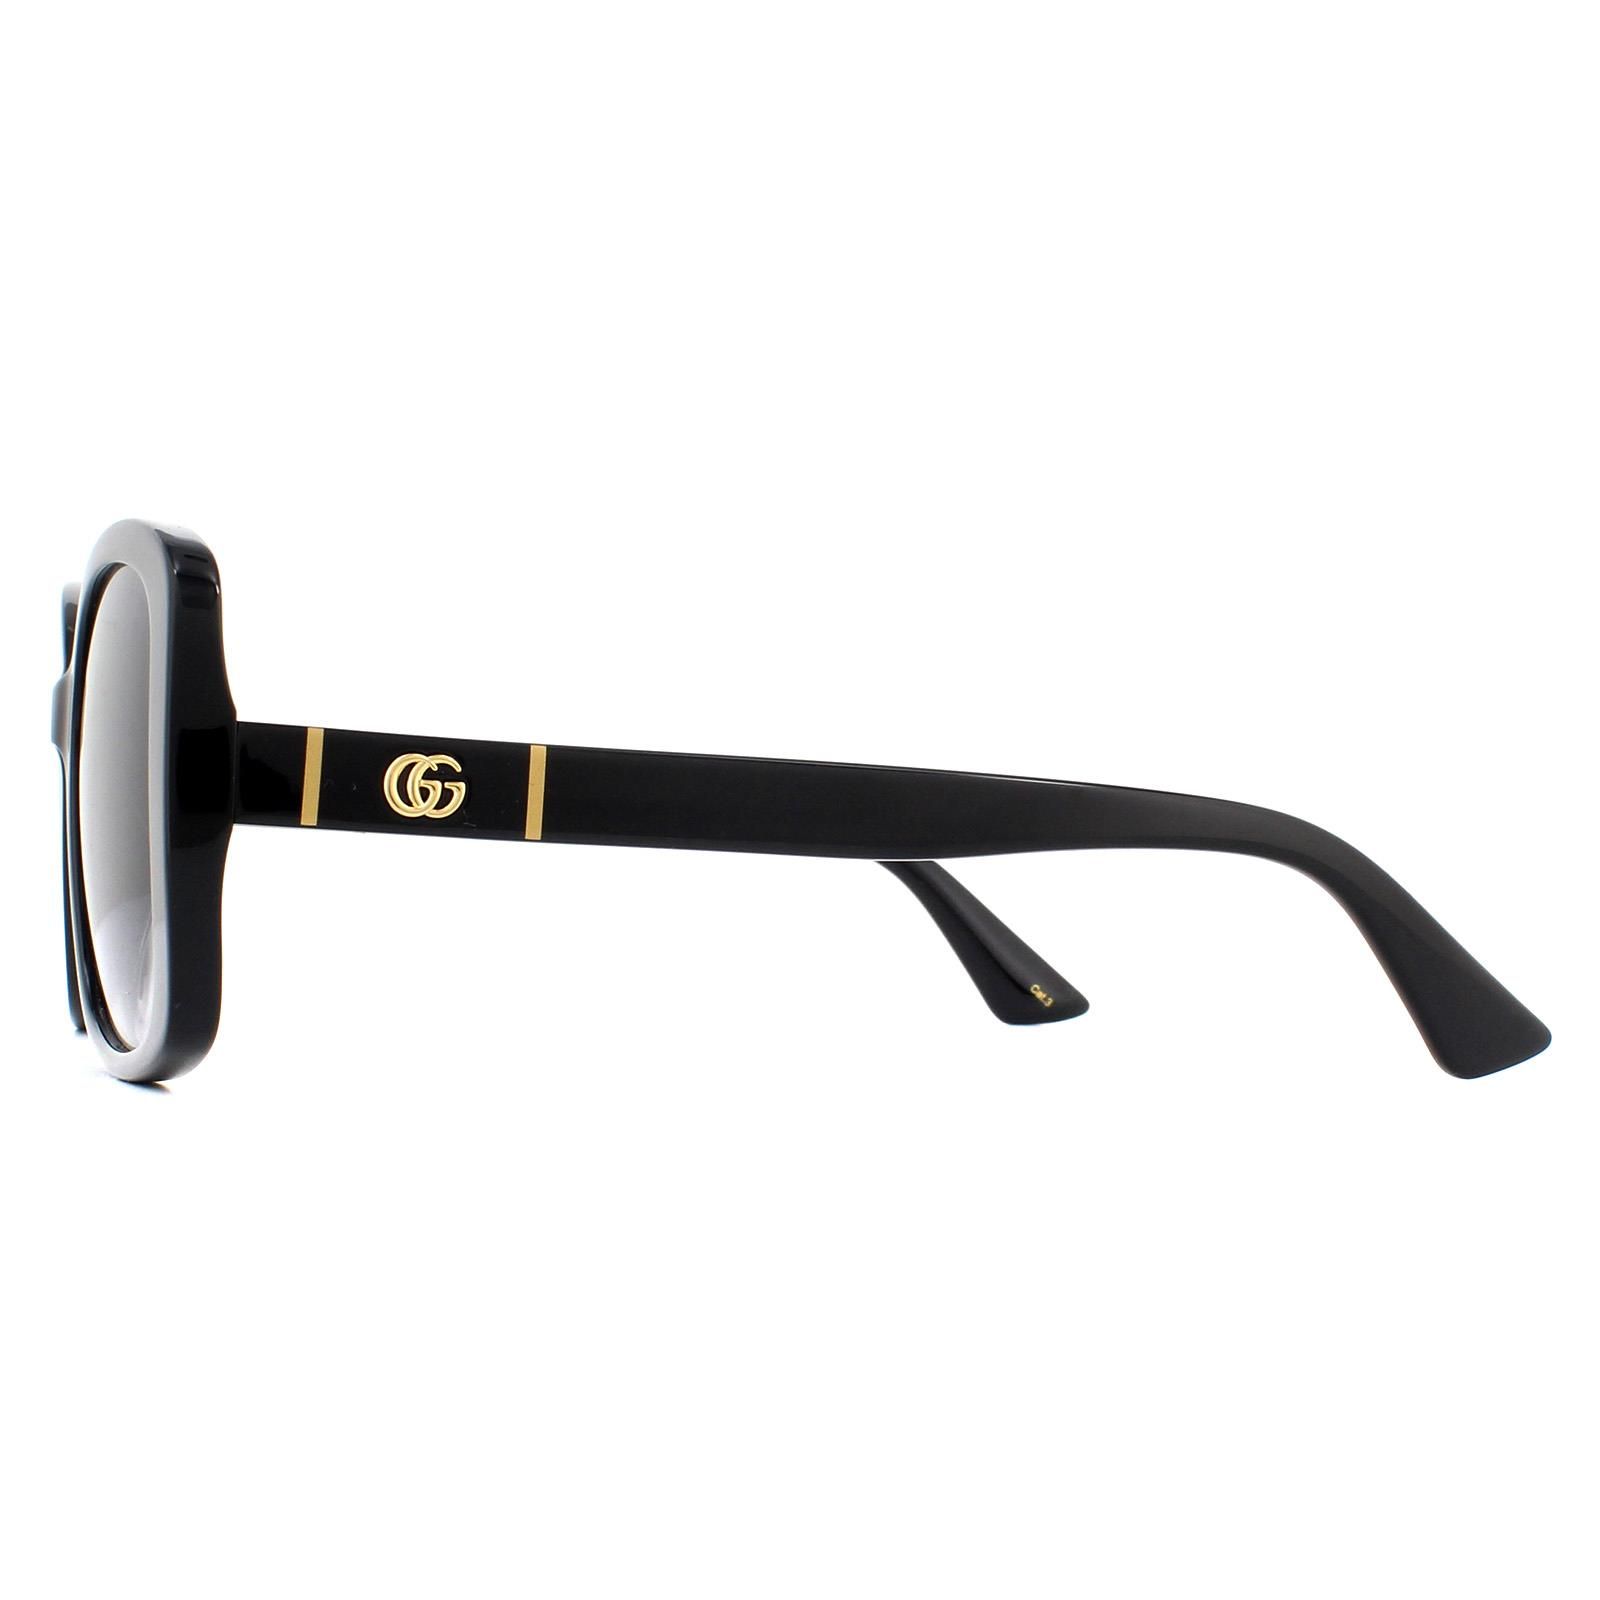 Gucci Sunglasses GG0762S 001 Black Grey Gradient are super feminine butterfly style sunglasses with a chunky acetate frame featuring the interlocking GG logo on the temples.